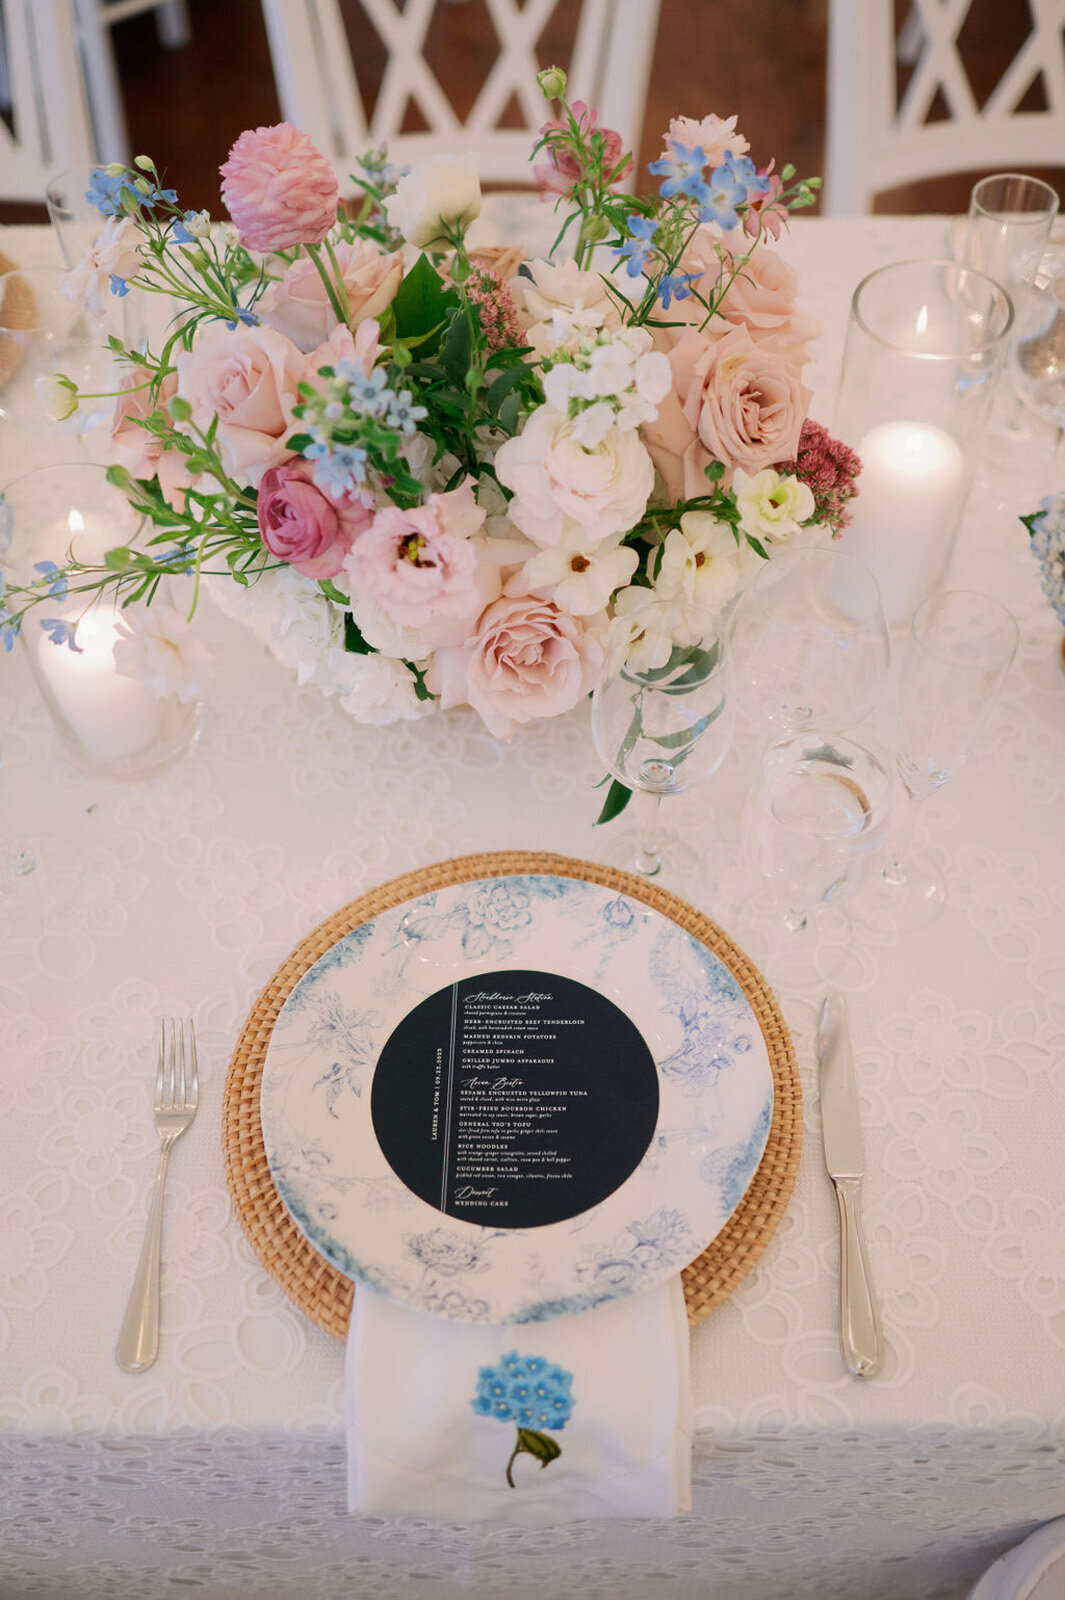 Kate_Murtaugh_Events_Cape_Cod_tented_wedding_dinner_plate